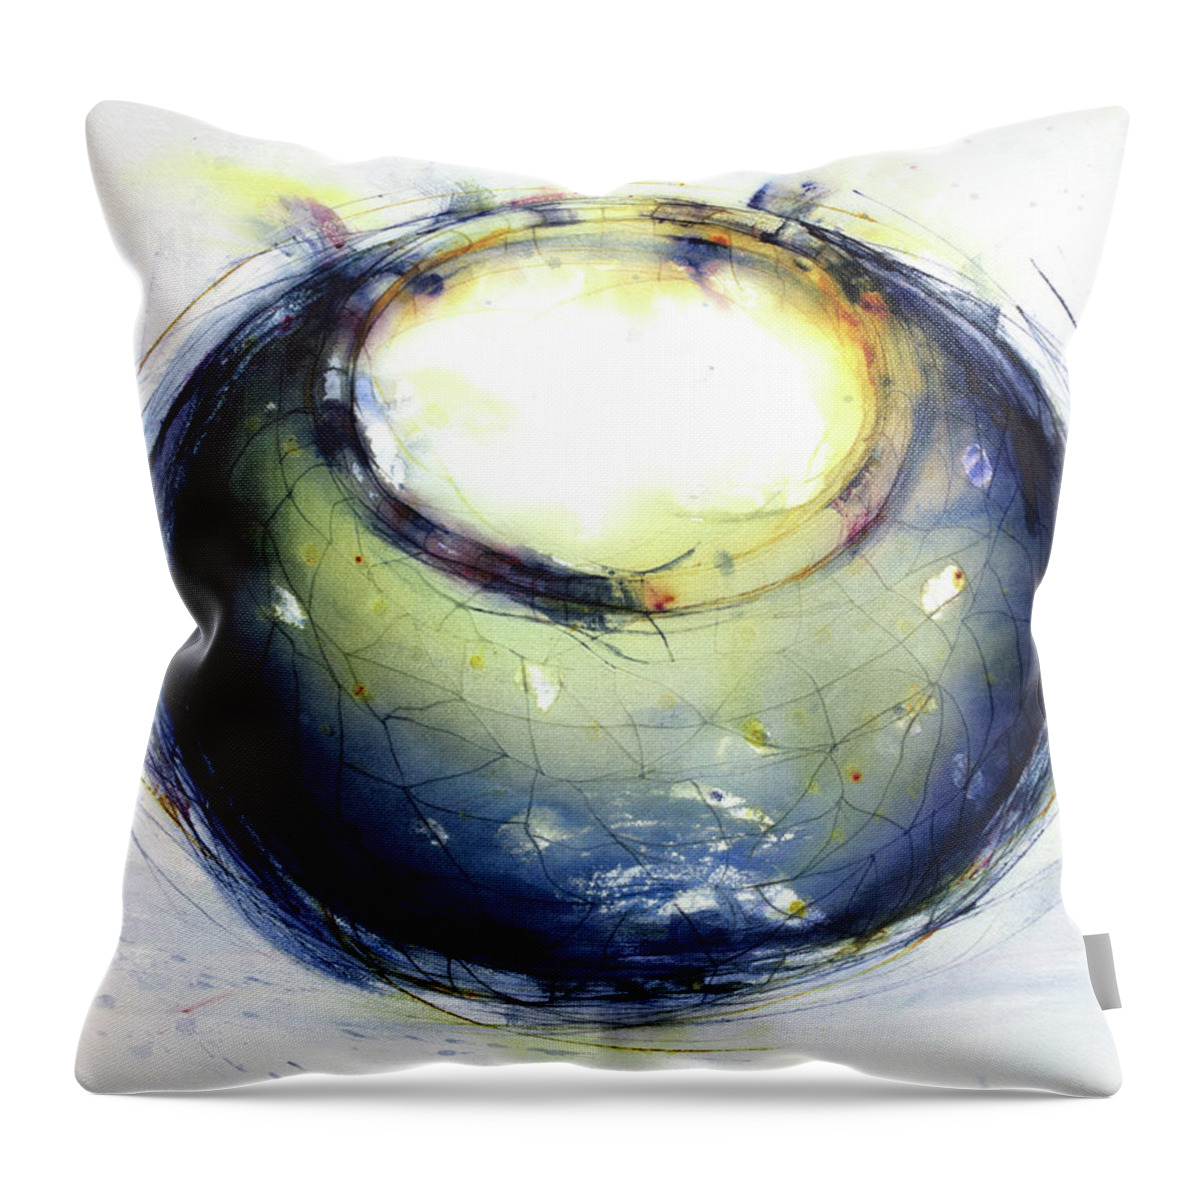  Throw Pillow featuring the painting 'Contained' by Petra Rau